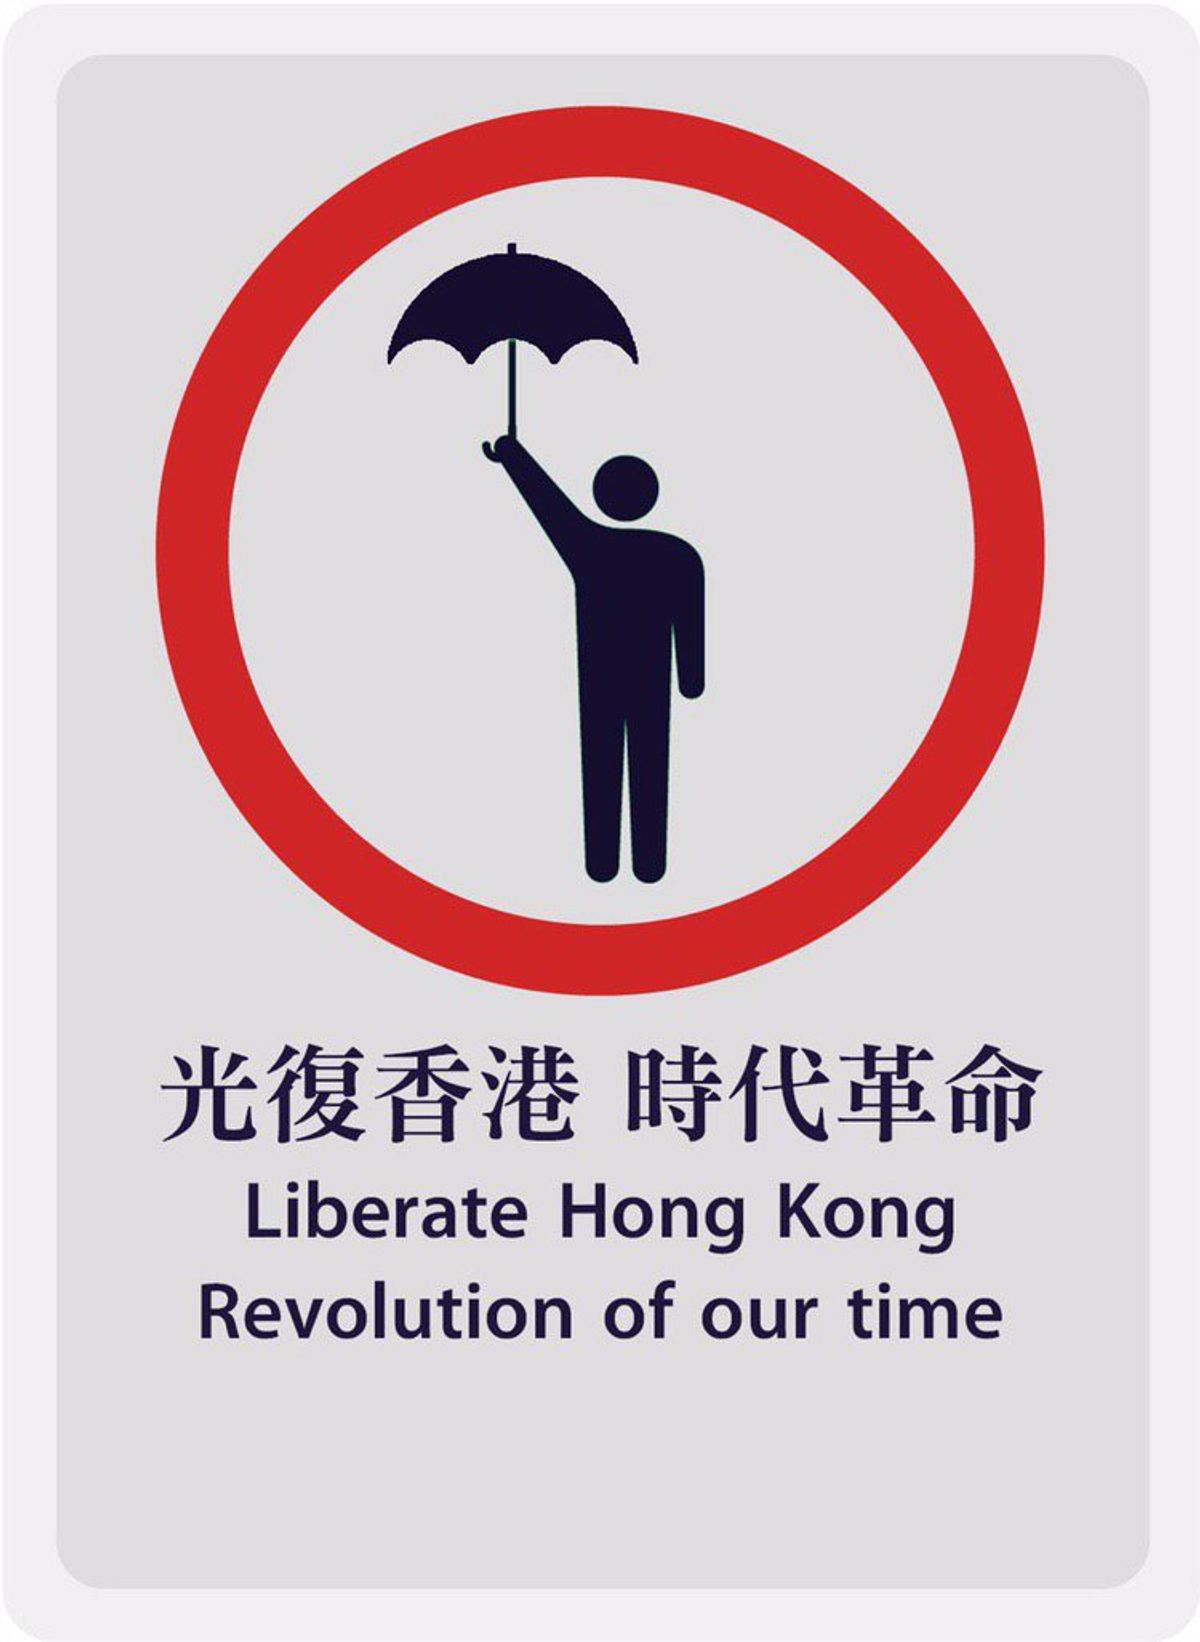 One of the works of art that has appeared on Hong Kong's subway during the protests 